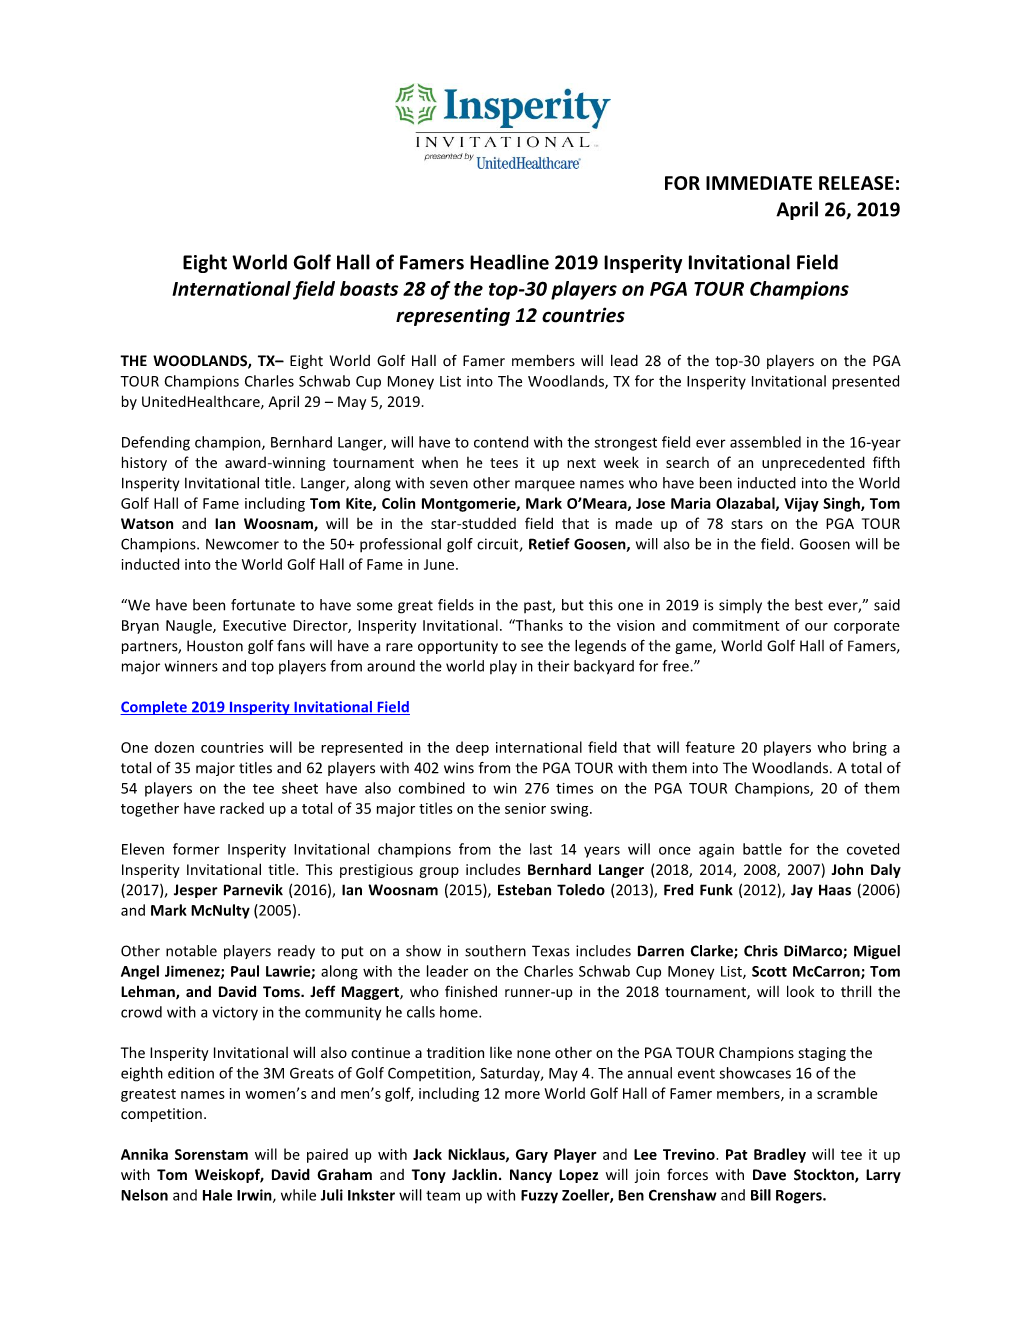 FOR IMMEDIATE RELEASE: April 26, 2019 Eight World Golf Hall Of